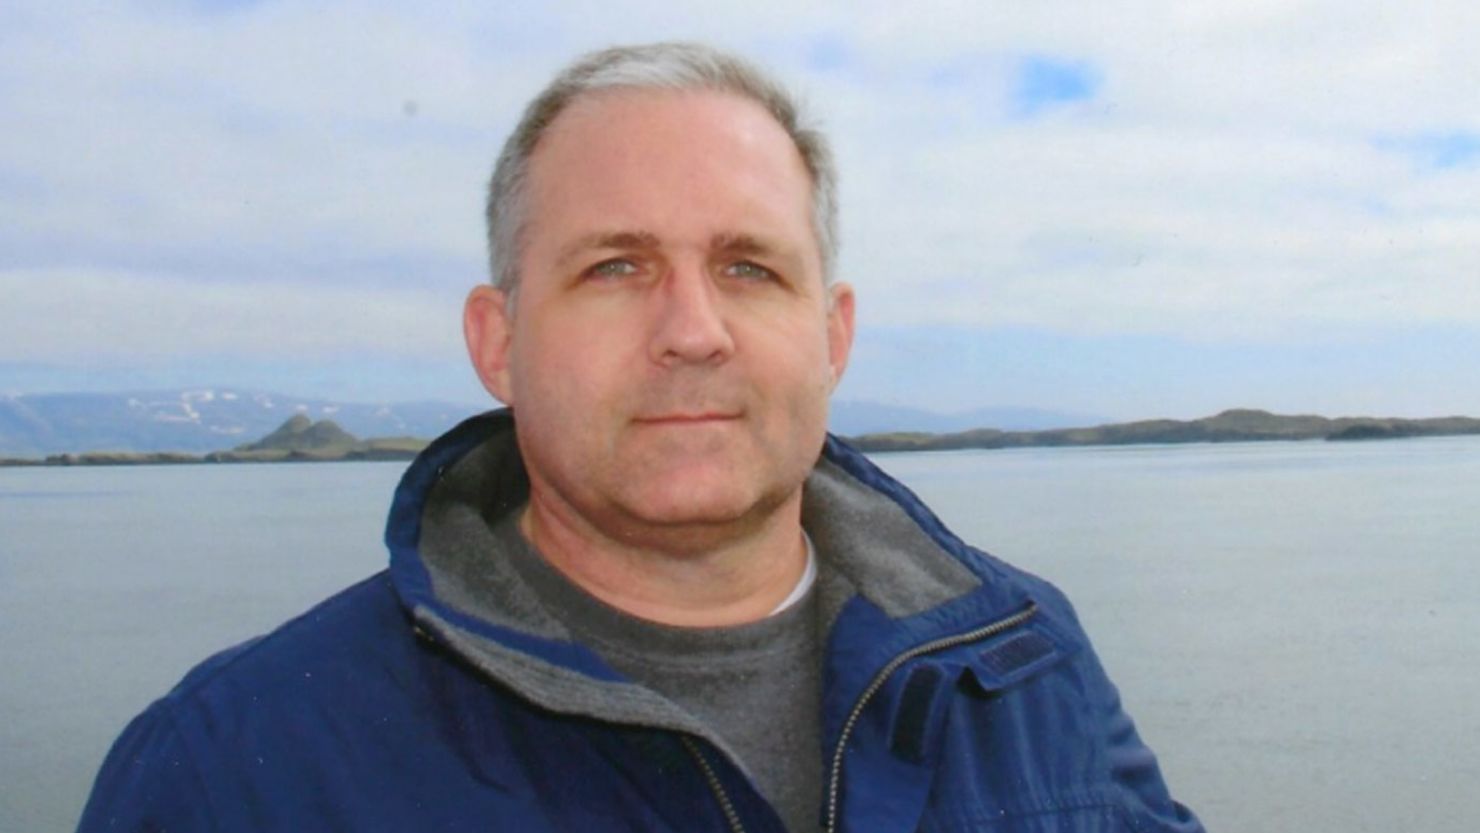 Paul Whelan, a citizen of the United States, the United Kingdom, Ireland and Canada was arrested December 28 by Russia's Federal Security Service (FSB).